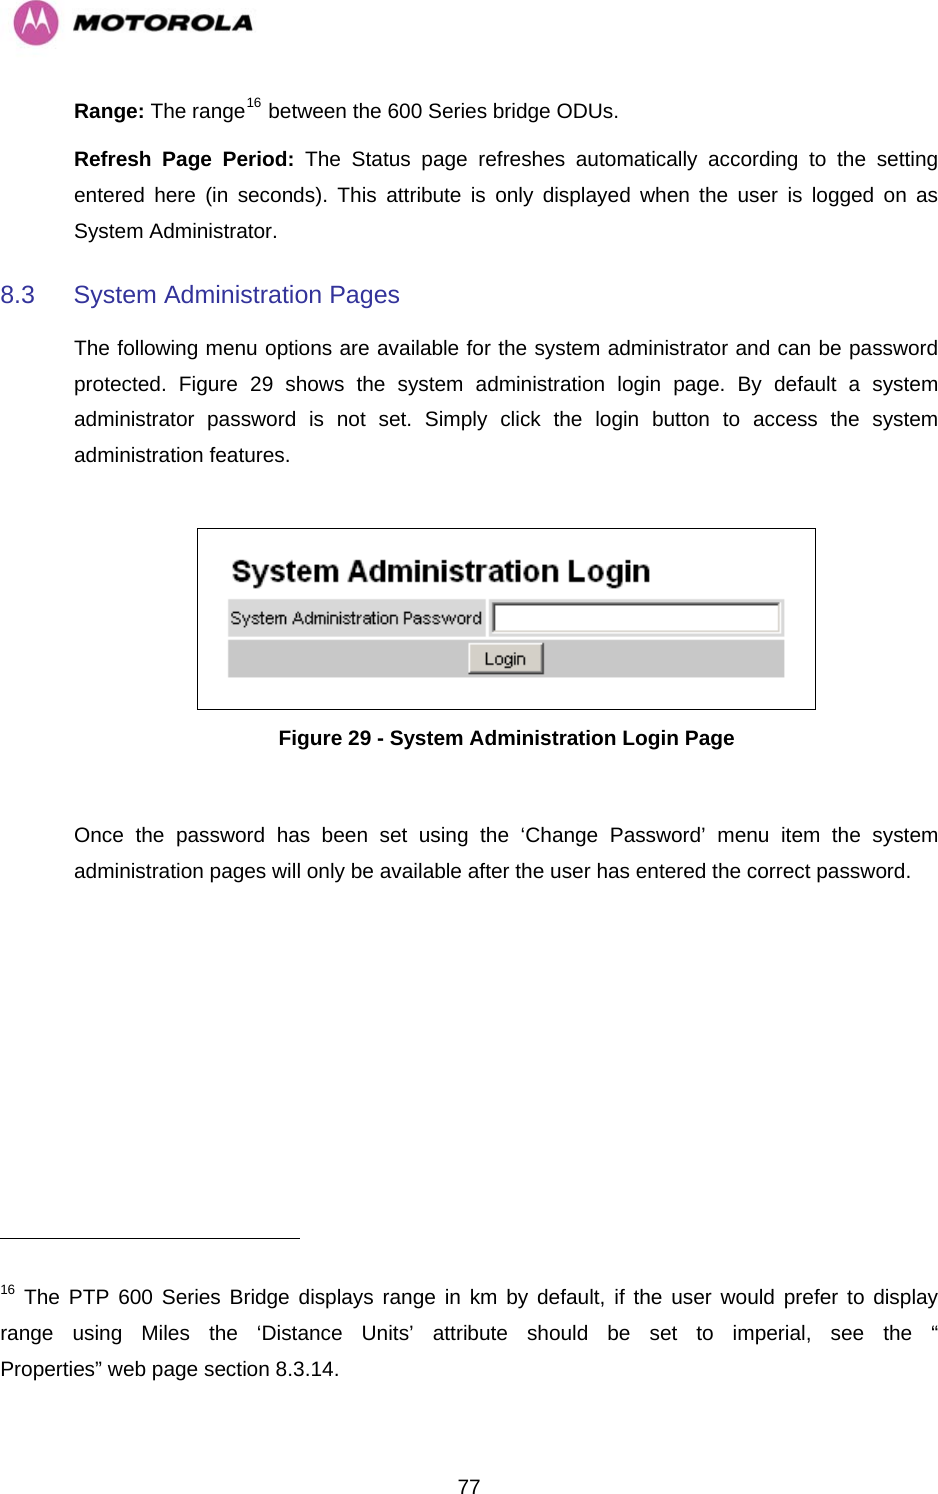   77Range: The range16 between the 600 Series bridge ODUs.  Refresh Page Period: The Status page refreshes automatically according to the setting entered here (in seconds). This attribute is only displayed when the user is logged on as System Administrator. 8.3  System Administration Pages  The following menu options are available for the system administrator and can be password protected.  Figure 29 shows the system administration login page. By default a system administrator password is not set. Simply click the login button to access the system administration features.    Figure 29 - System Administration Login Page  Once the password has been set using the ‘Change Password’ menu item the system administration pages will only be available after the user has entered the correct password.                                                       16 The PTP 600 Series Bridge displays range in km by default, if the user would prefer to display range using Miles the ‘Distance Units’ attribute should be set to imperial, see the “” web page section 8.3.14. Properties